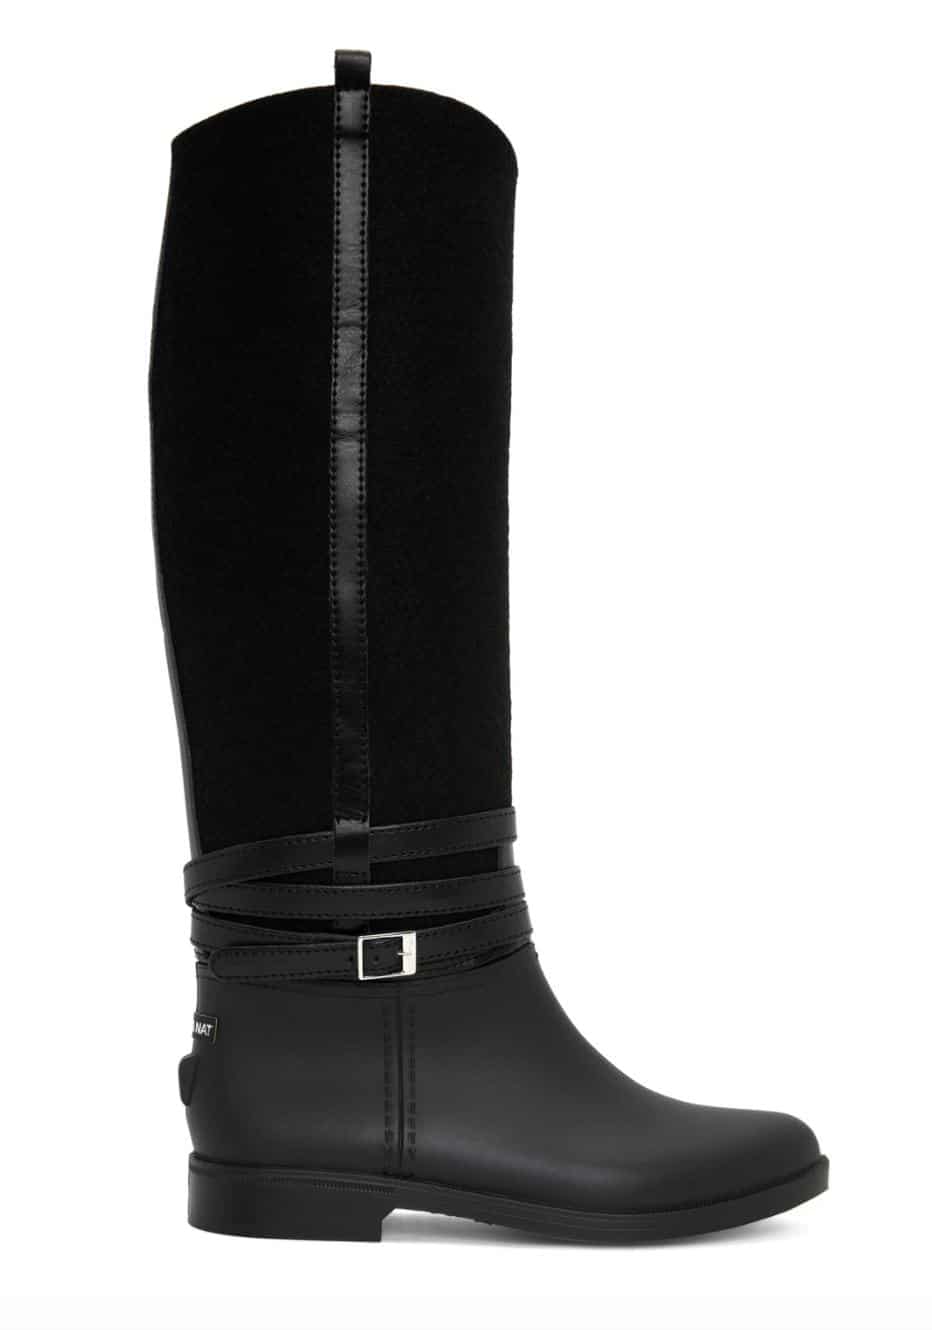 Flat tall black boots with strap wrapped multiple times around the ankle and decorative ankle buckle